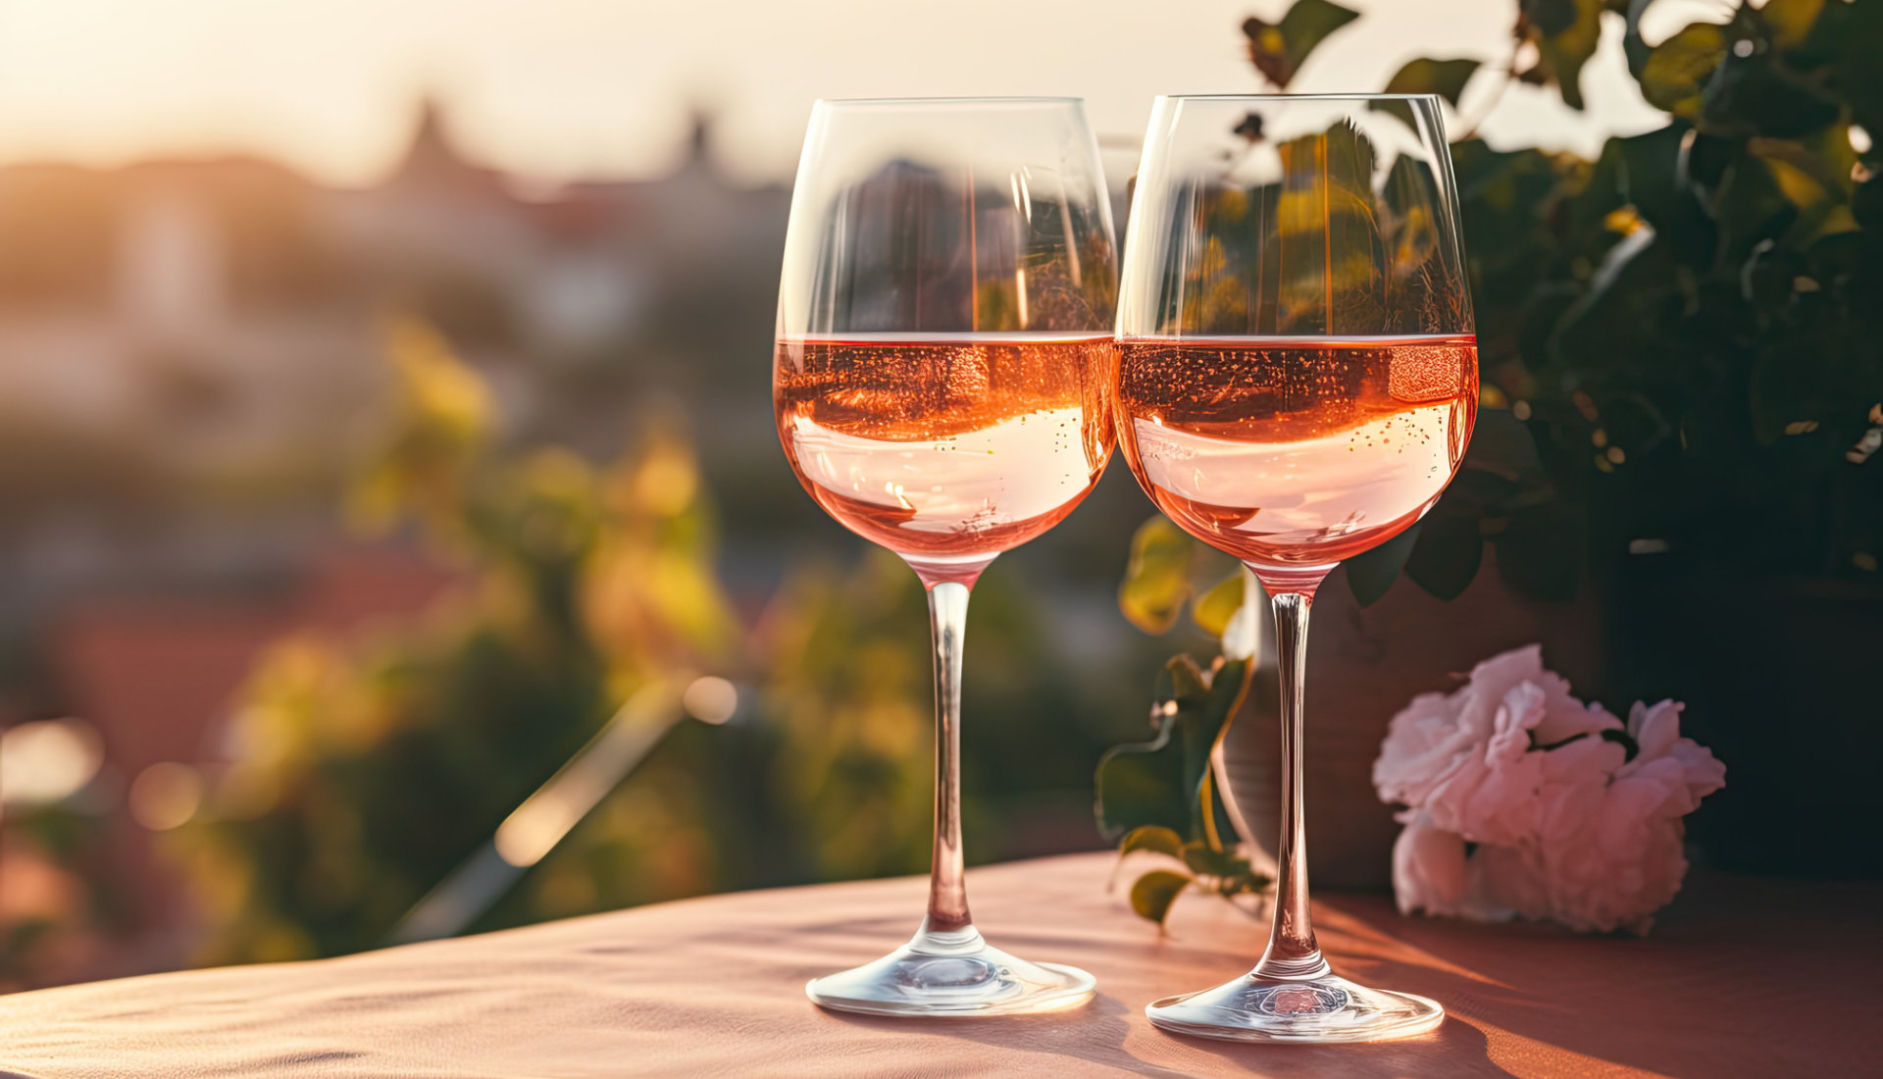 rose wine temperature guide - two glasses of rose wine at sunset